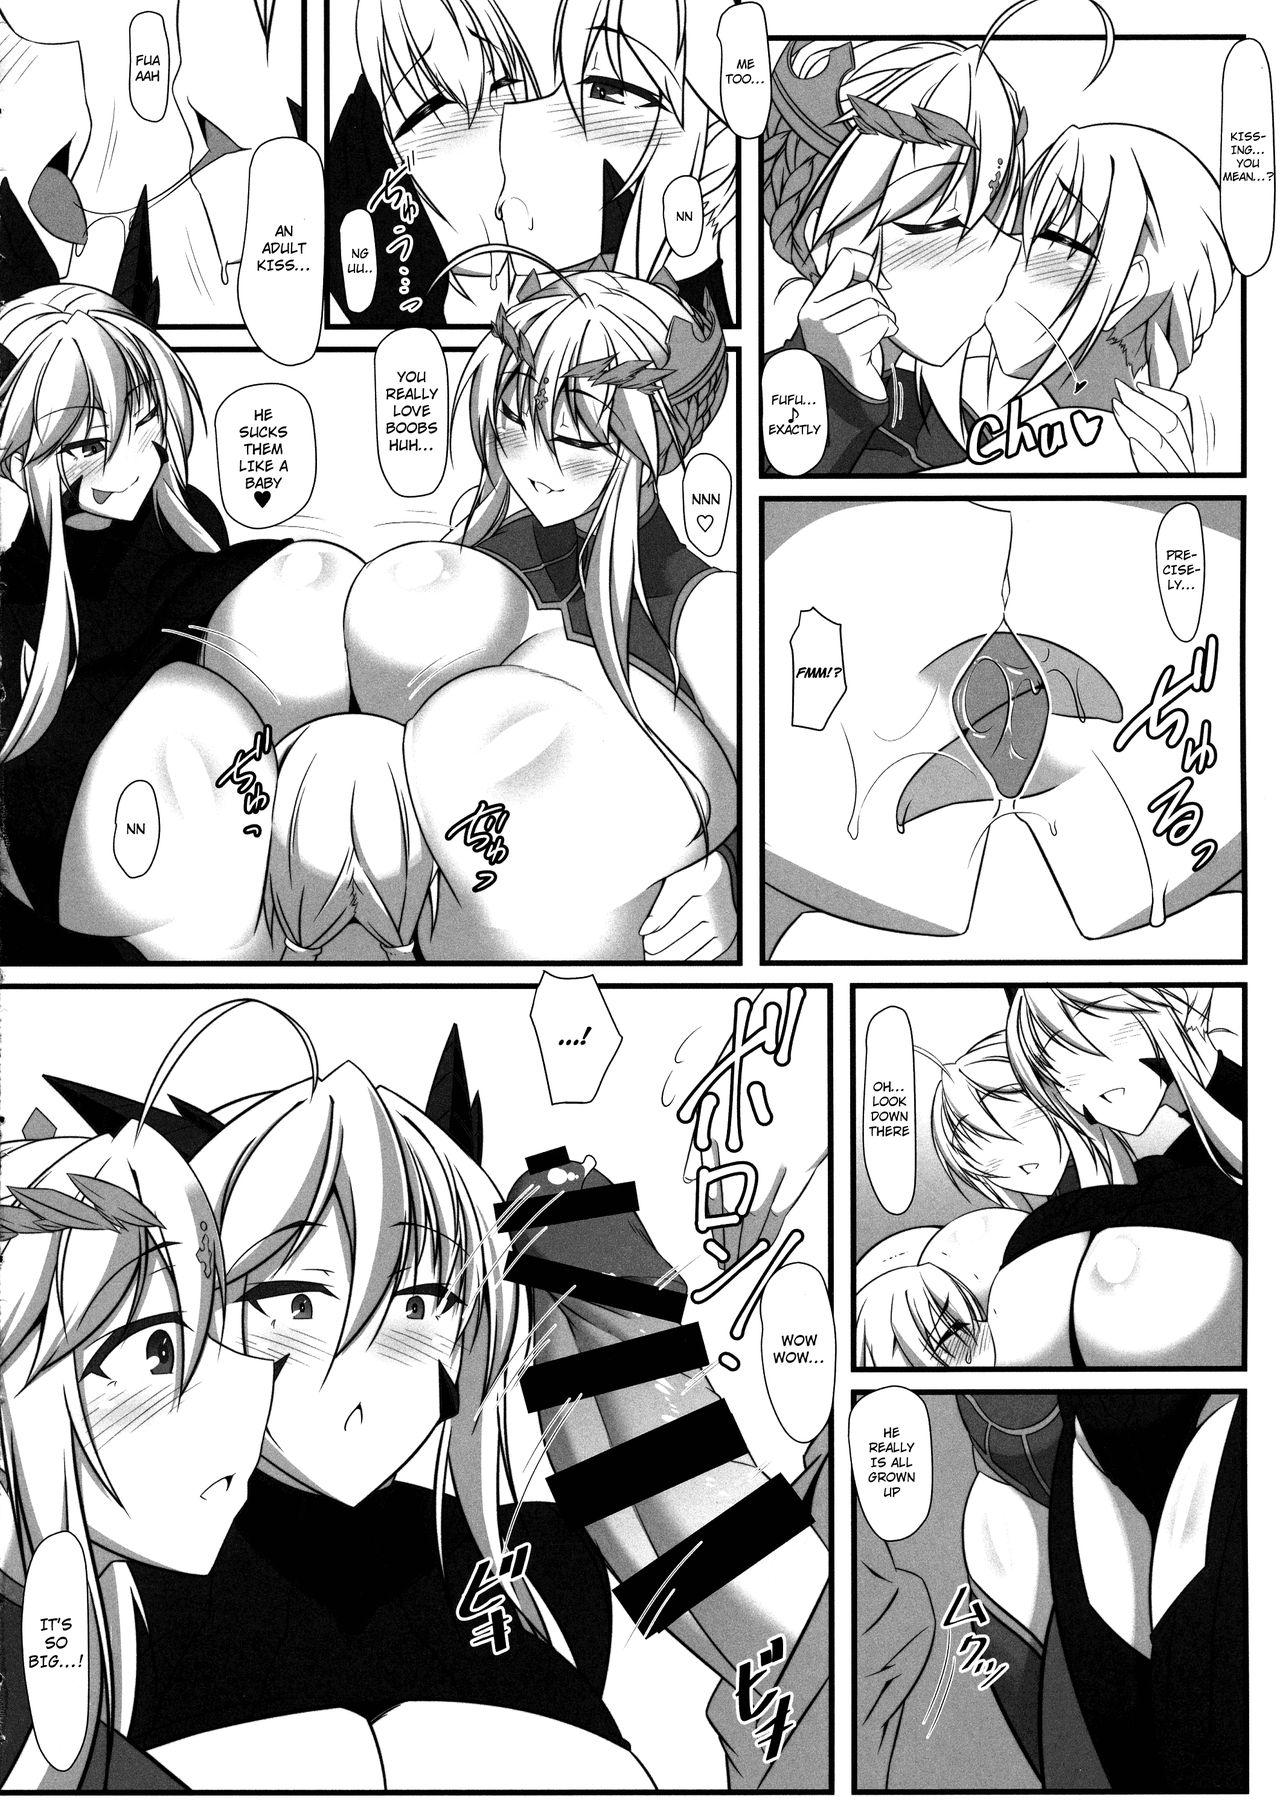 Transex Souou to Maguau - Fate grand order Swingers - Page 7